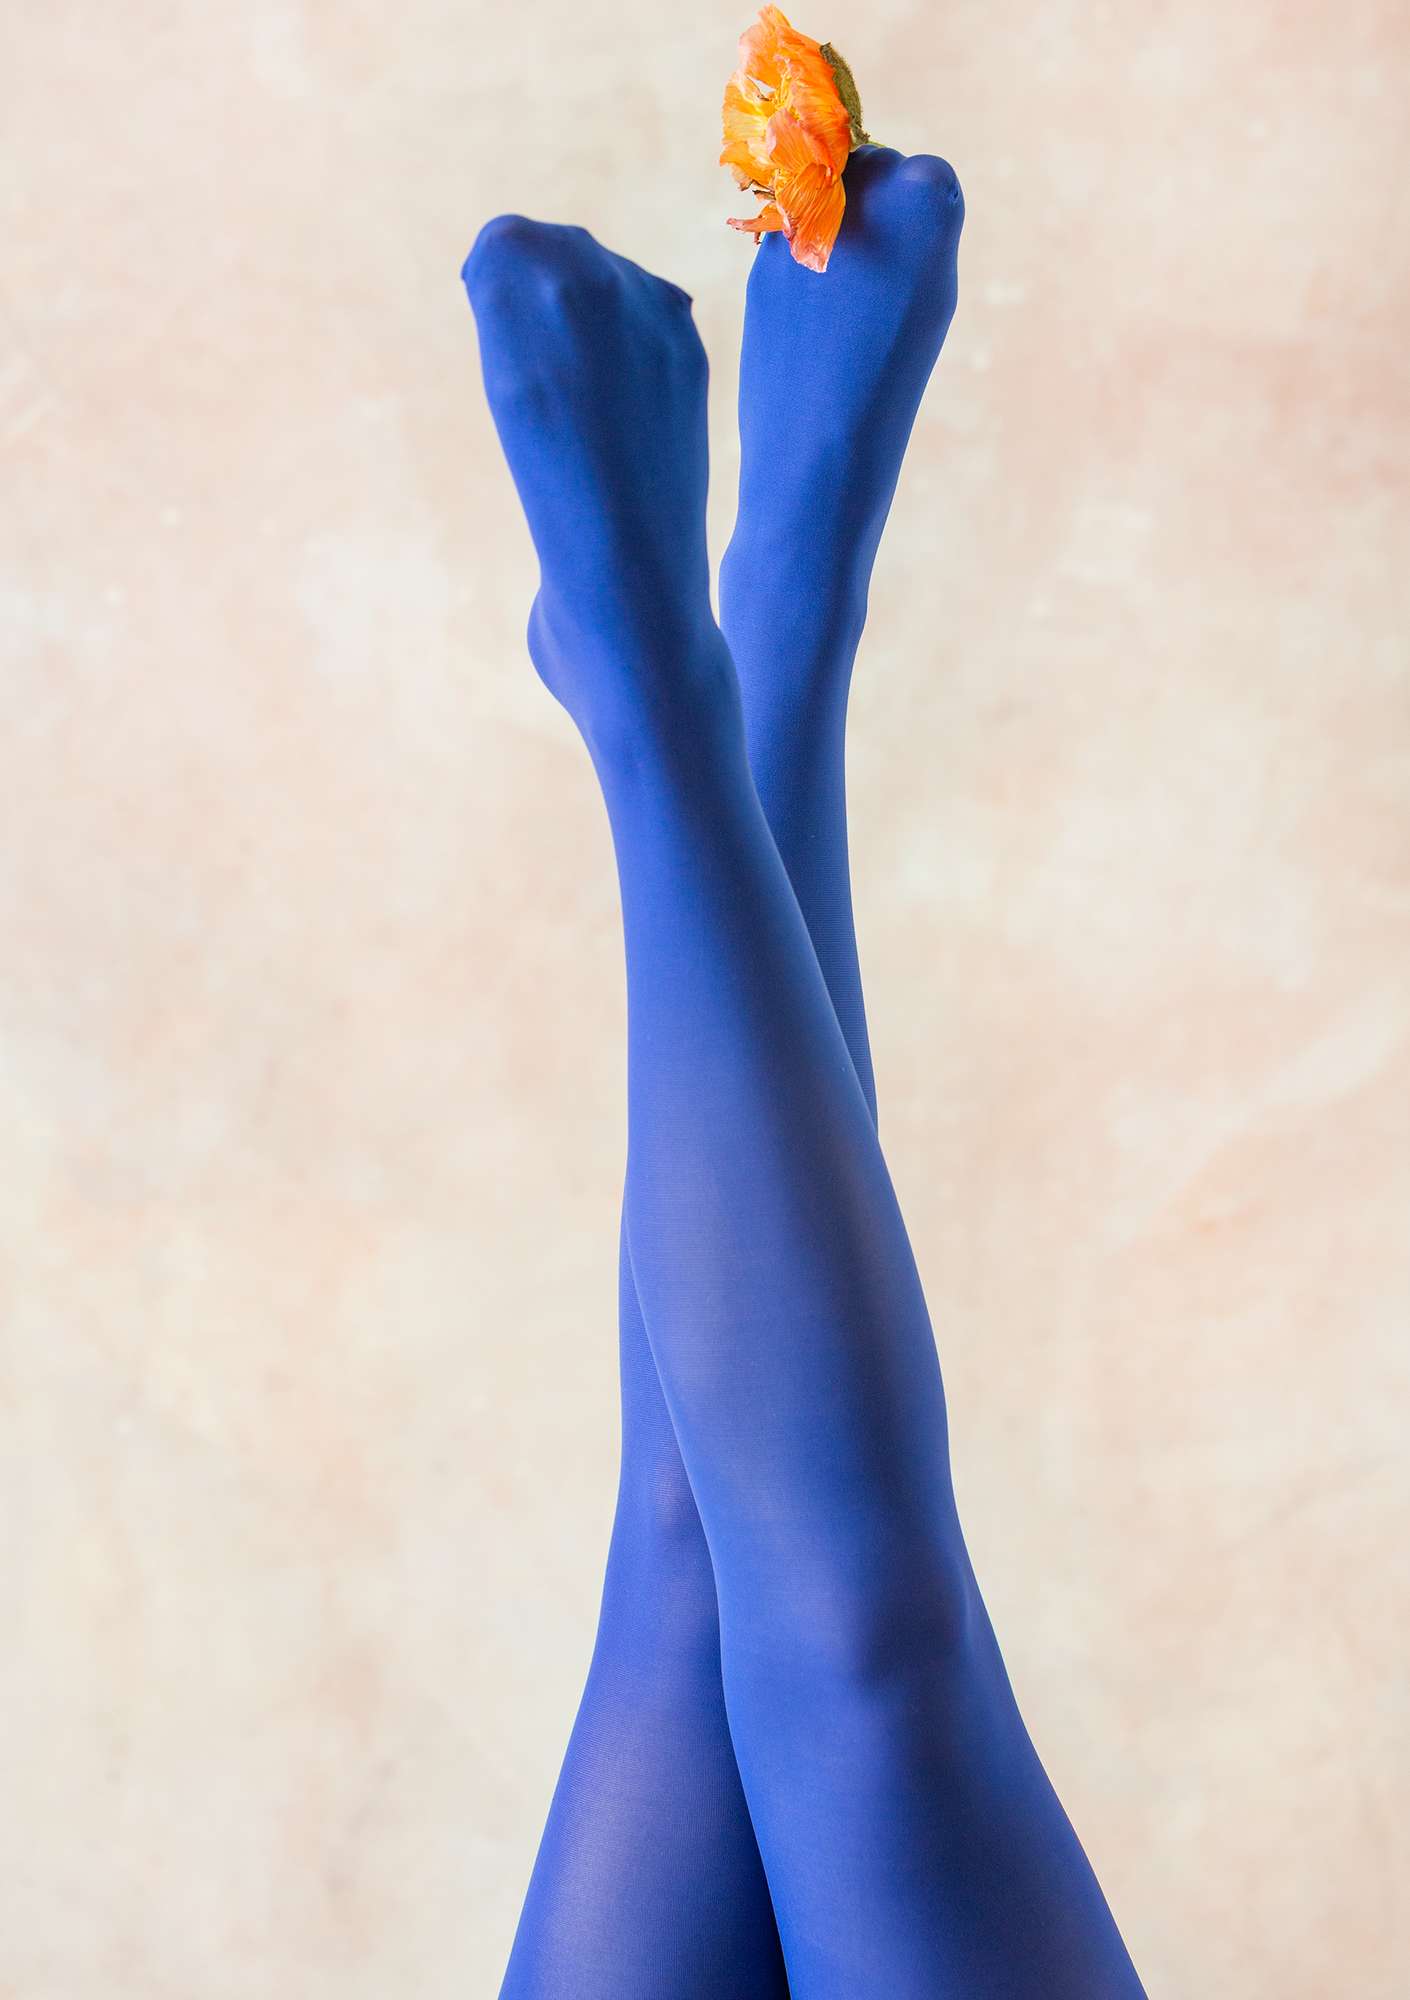 Solid-colored tights klein blue